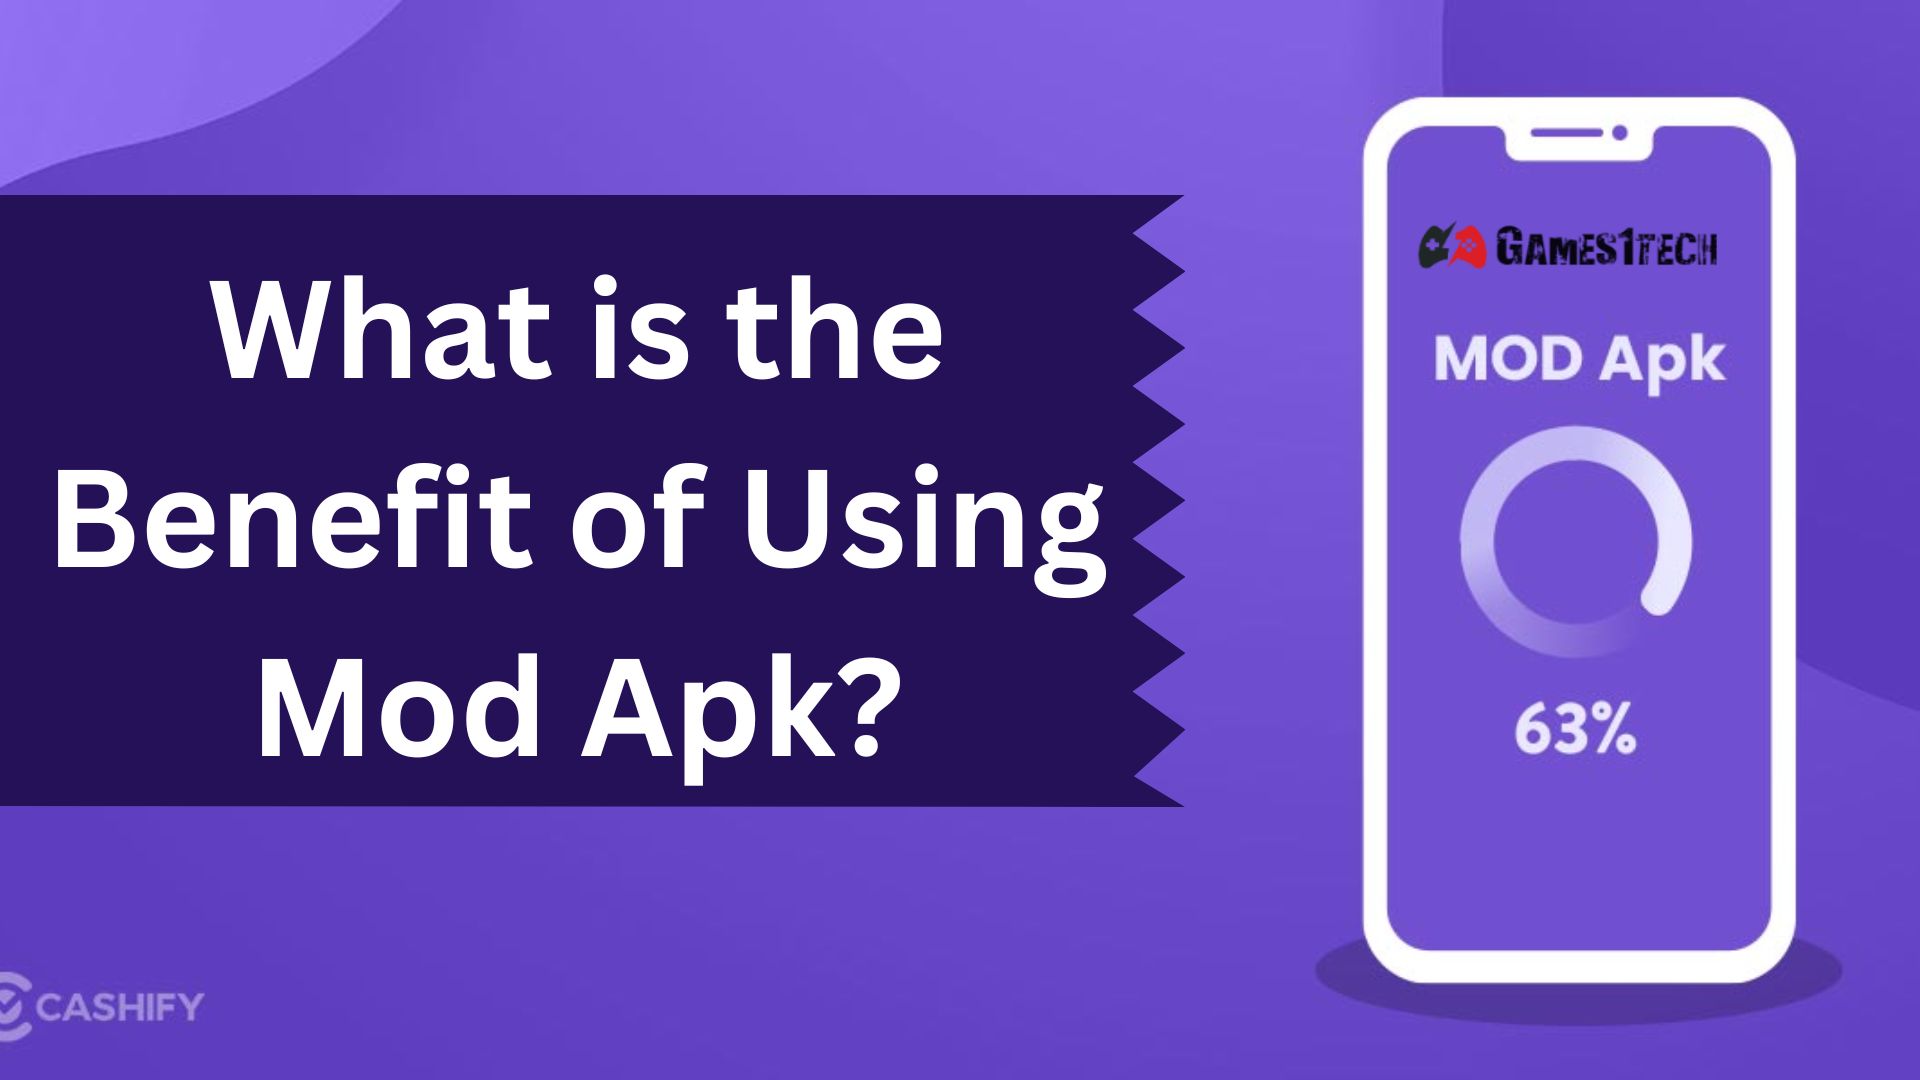 What is the Benefit of Using Mod Apk?